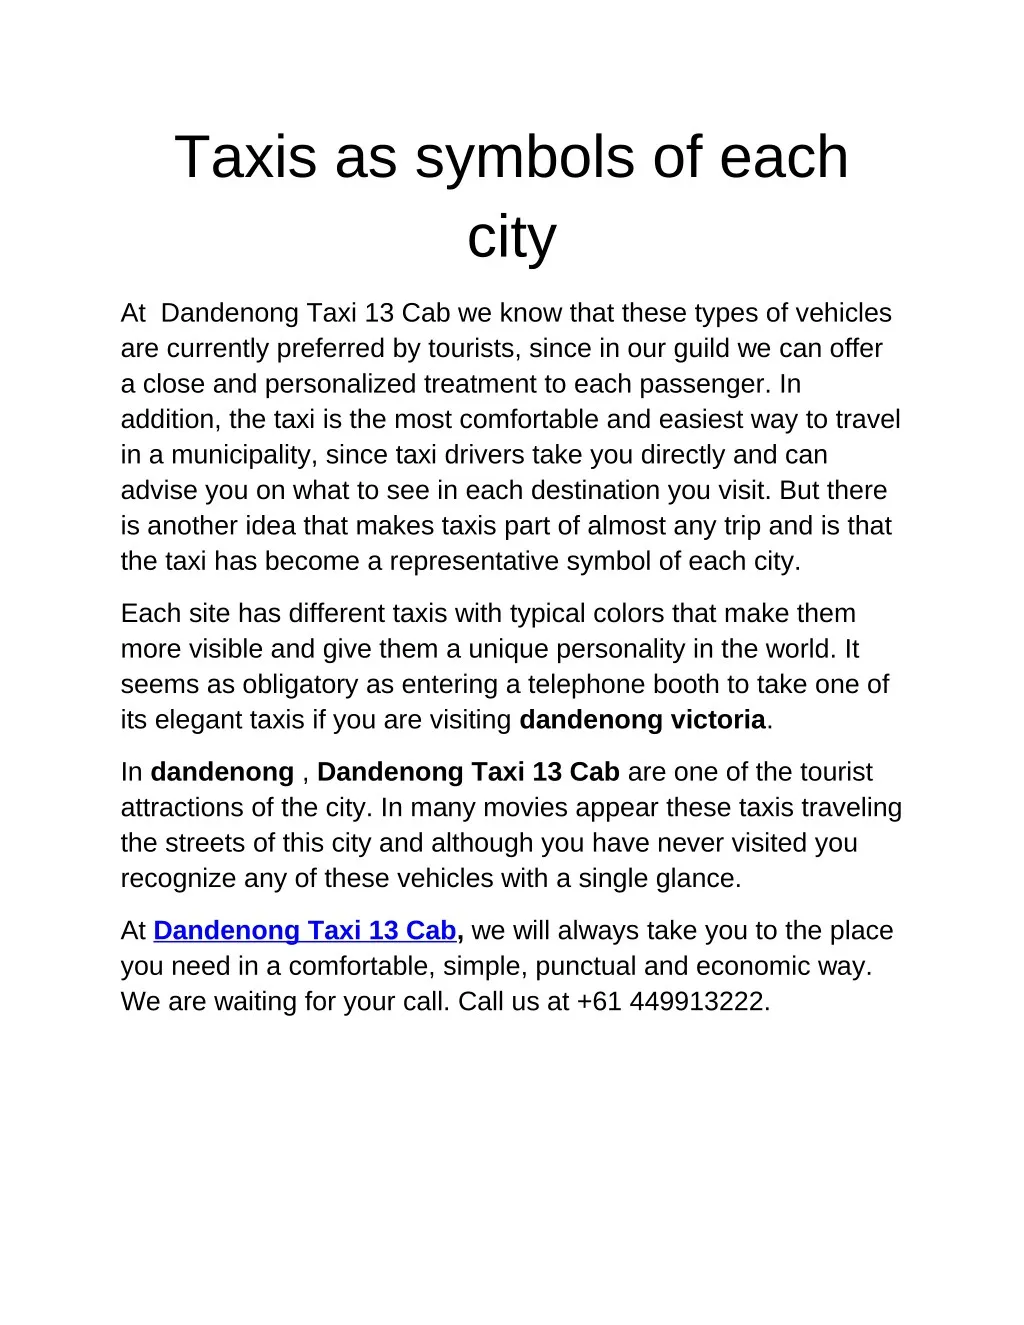 taxis as symbols of each city